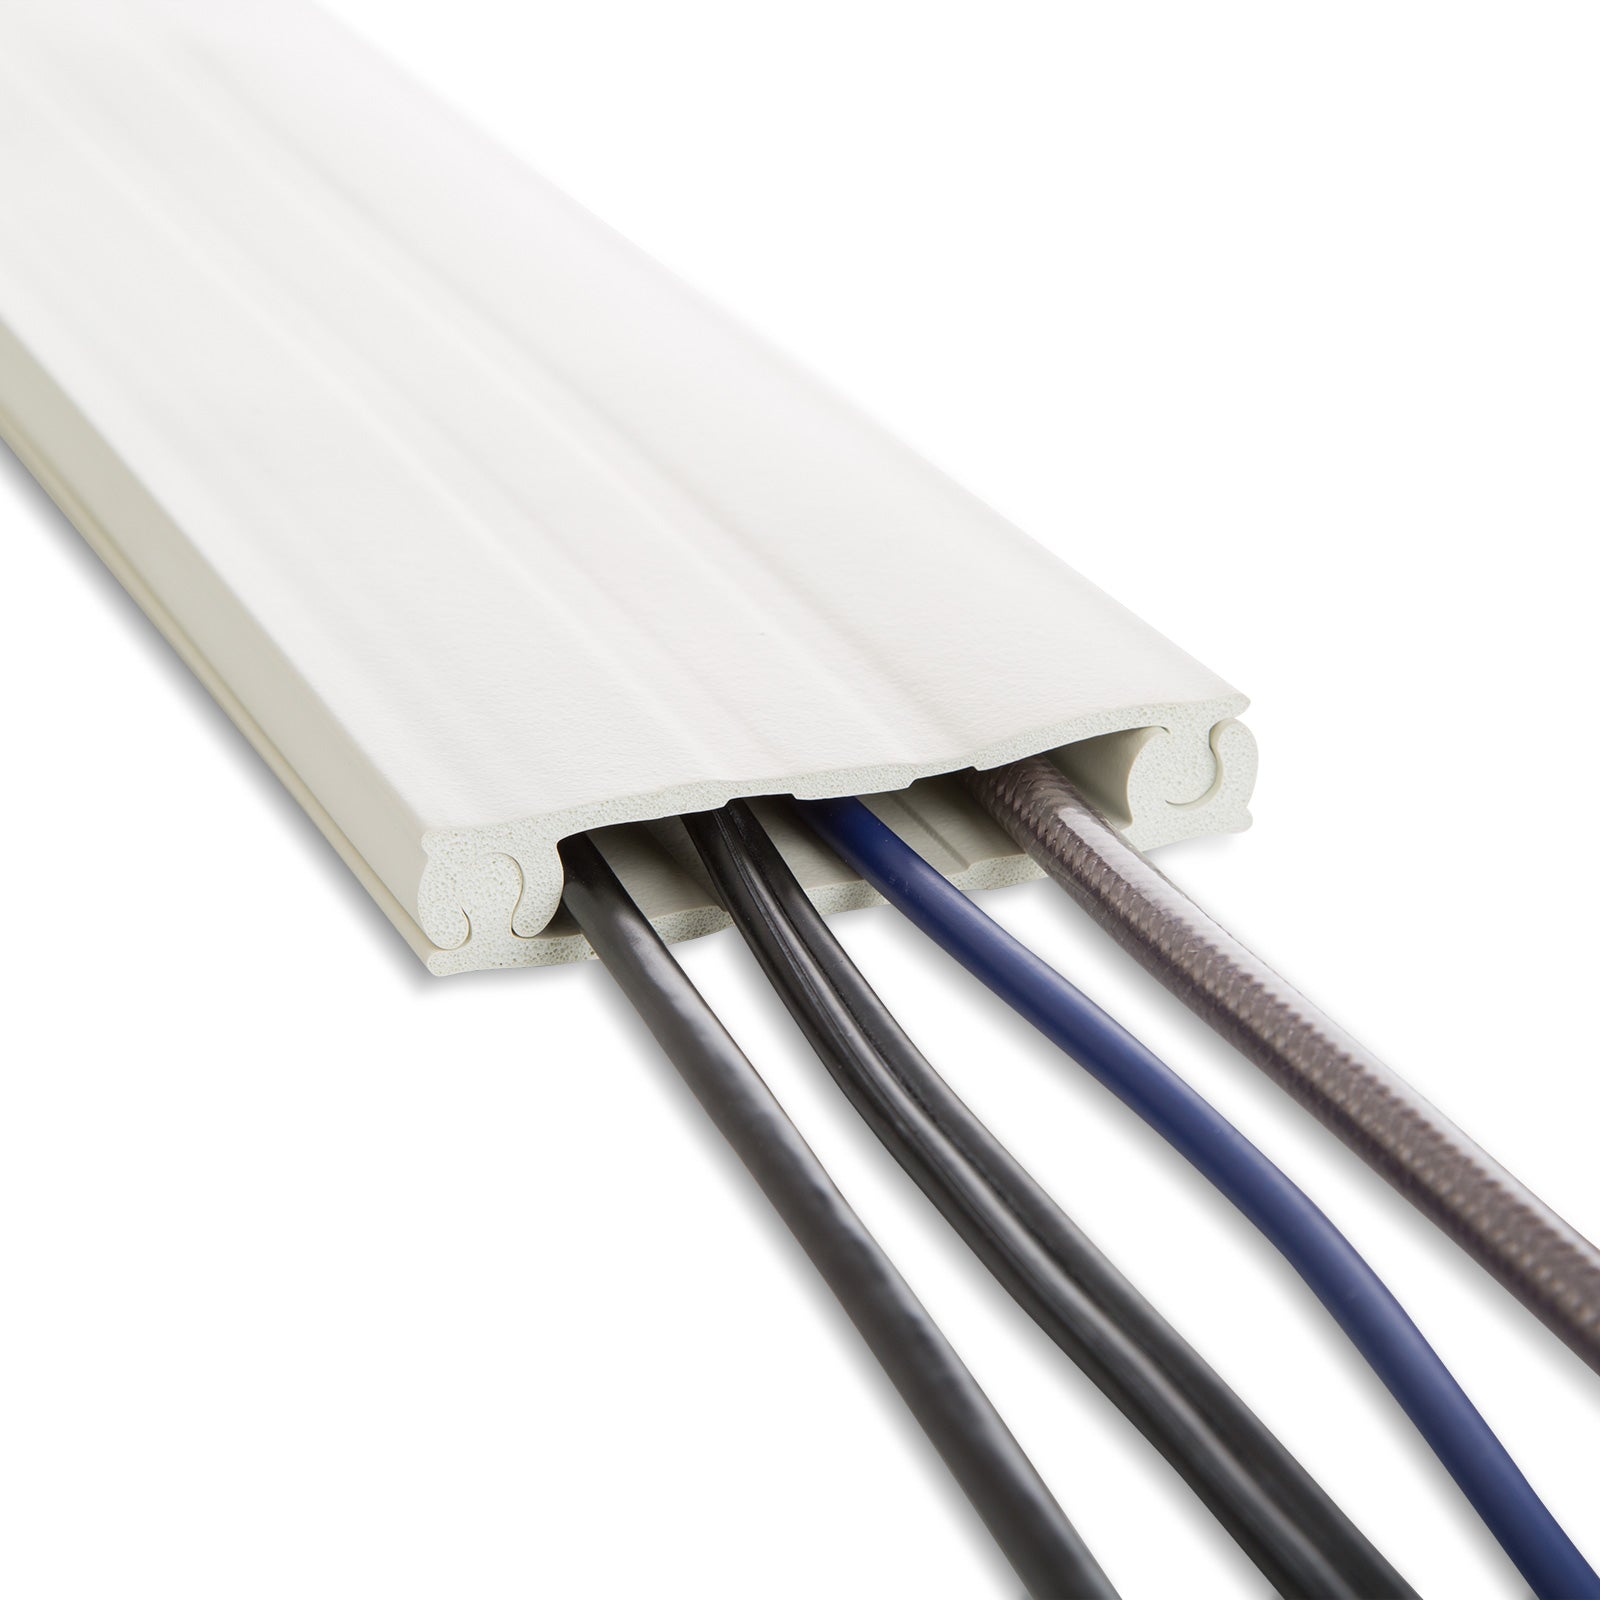 UT Wire 10' Cord Channel for Wall Cover Conceal, Paintable White 